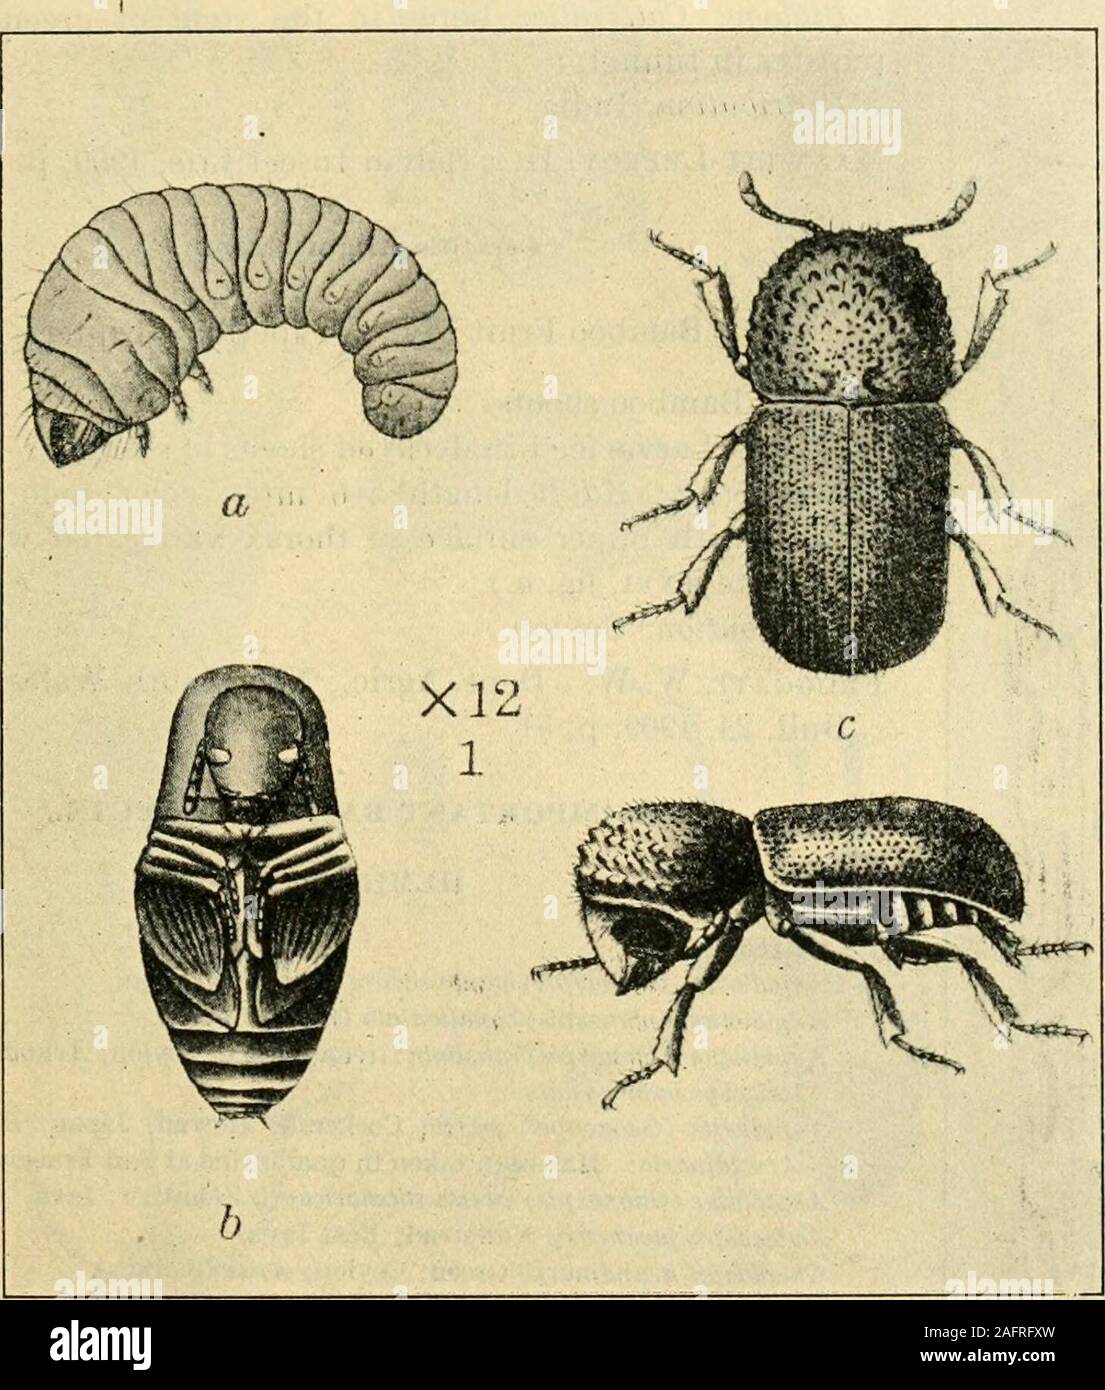 . A manual of dangerous insects likely to be introduced in the United States through importations. offee.) COLEOPTERA.Bostryohldaj. Apate monachus Fabricius; Africa, West Indies. (See Citrus.) Brachyrhinldae. Diaprepes abbreviatus Liimaeus; West Indies. (See Sugar cane.) Calandridae. &gt;K Caulophilus latinasus Say; Florida, probably imported; bores in seed. DIPTERA.Trypetidae. Ceratitis capitata Wiedemann; attacks Persea persea. (See Fruit.) BAMBOO INSECTS. 31 BAMBOO. {Bamhusa spp.; Dendrocalamus strictus, etc.; Arundinaria spp.; Cephalostachyumpergradle; Melocanna bambusioides; Phyllostachys Stock Photo